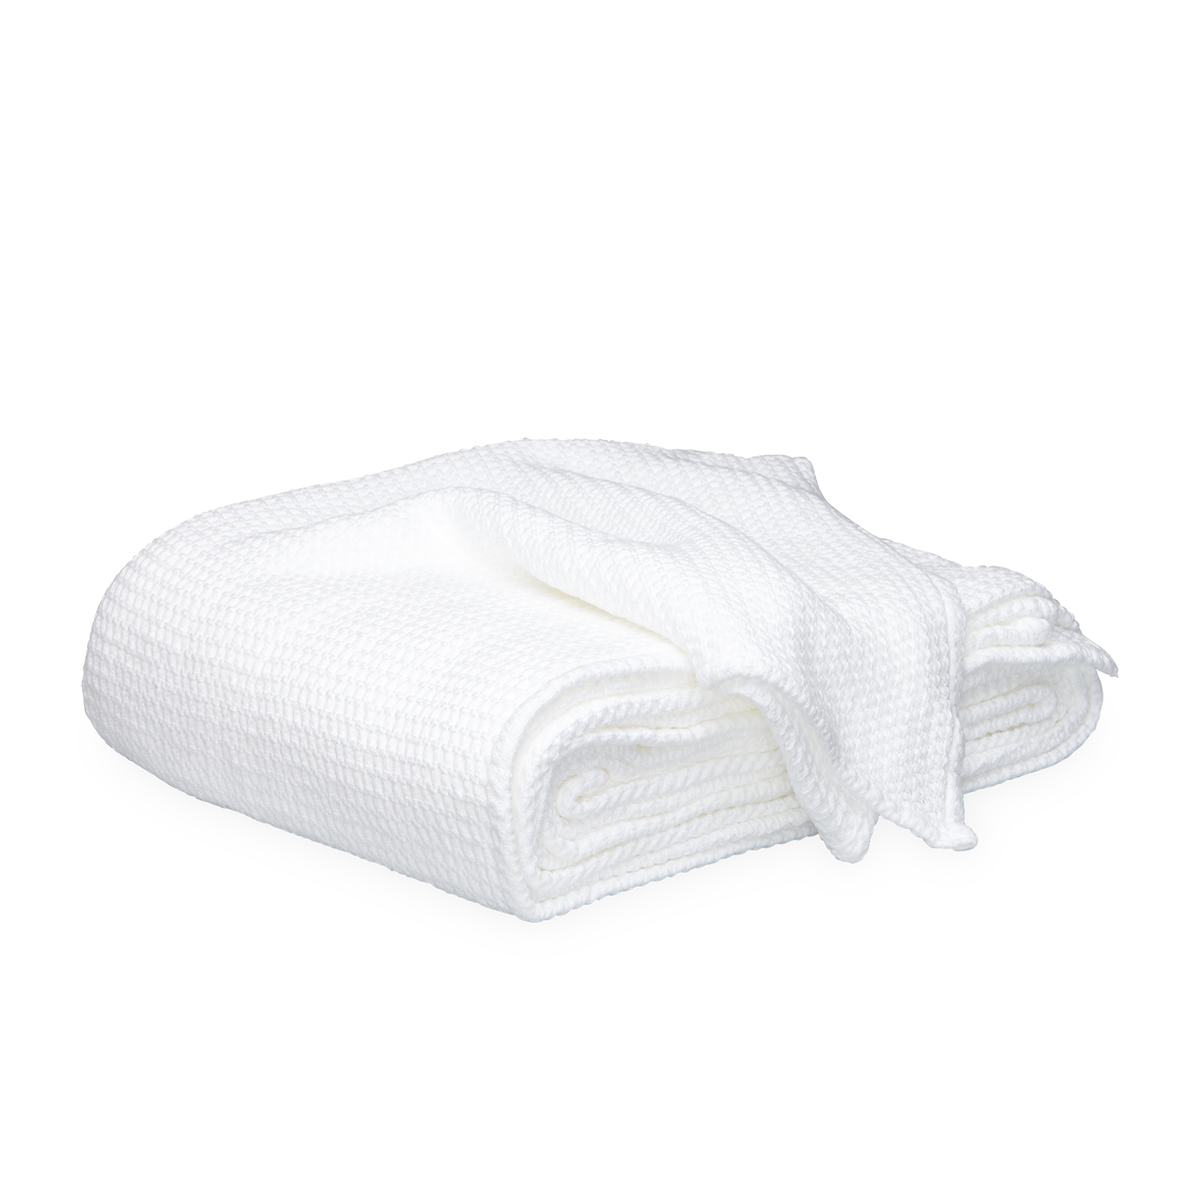 Clear Image of Matouk Chatham Blanket in White Color